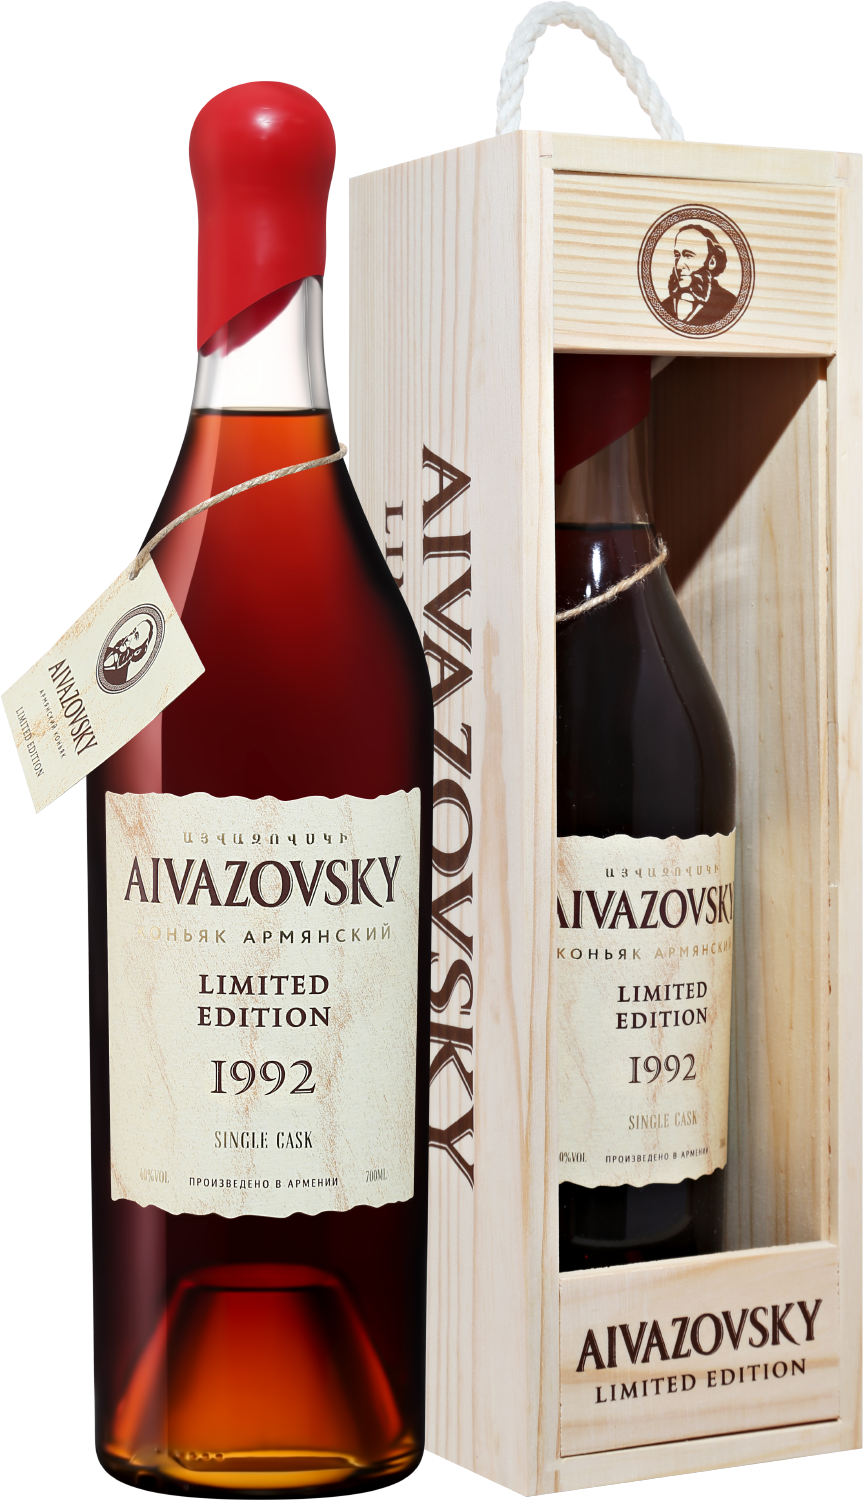 Aivazovsky Limited Edition 1992 (gift box)